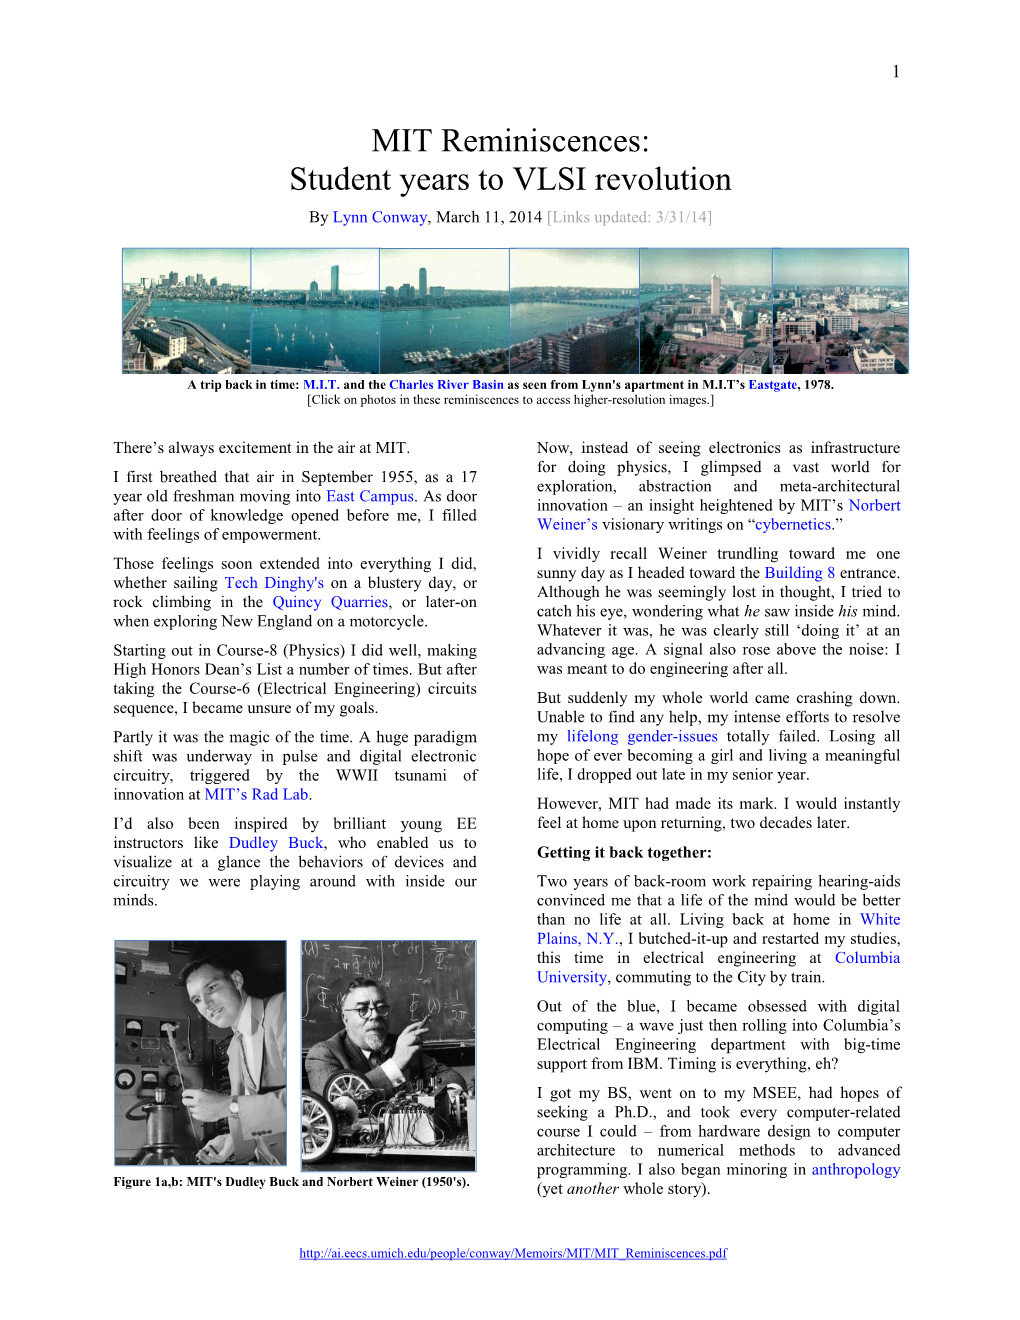 MIT Reminiscences: Student Years to VLSI Revolution by Lynn Conway, March 11, 2014 [Links Updated: 3/31/14]